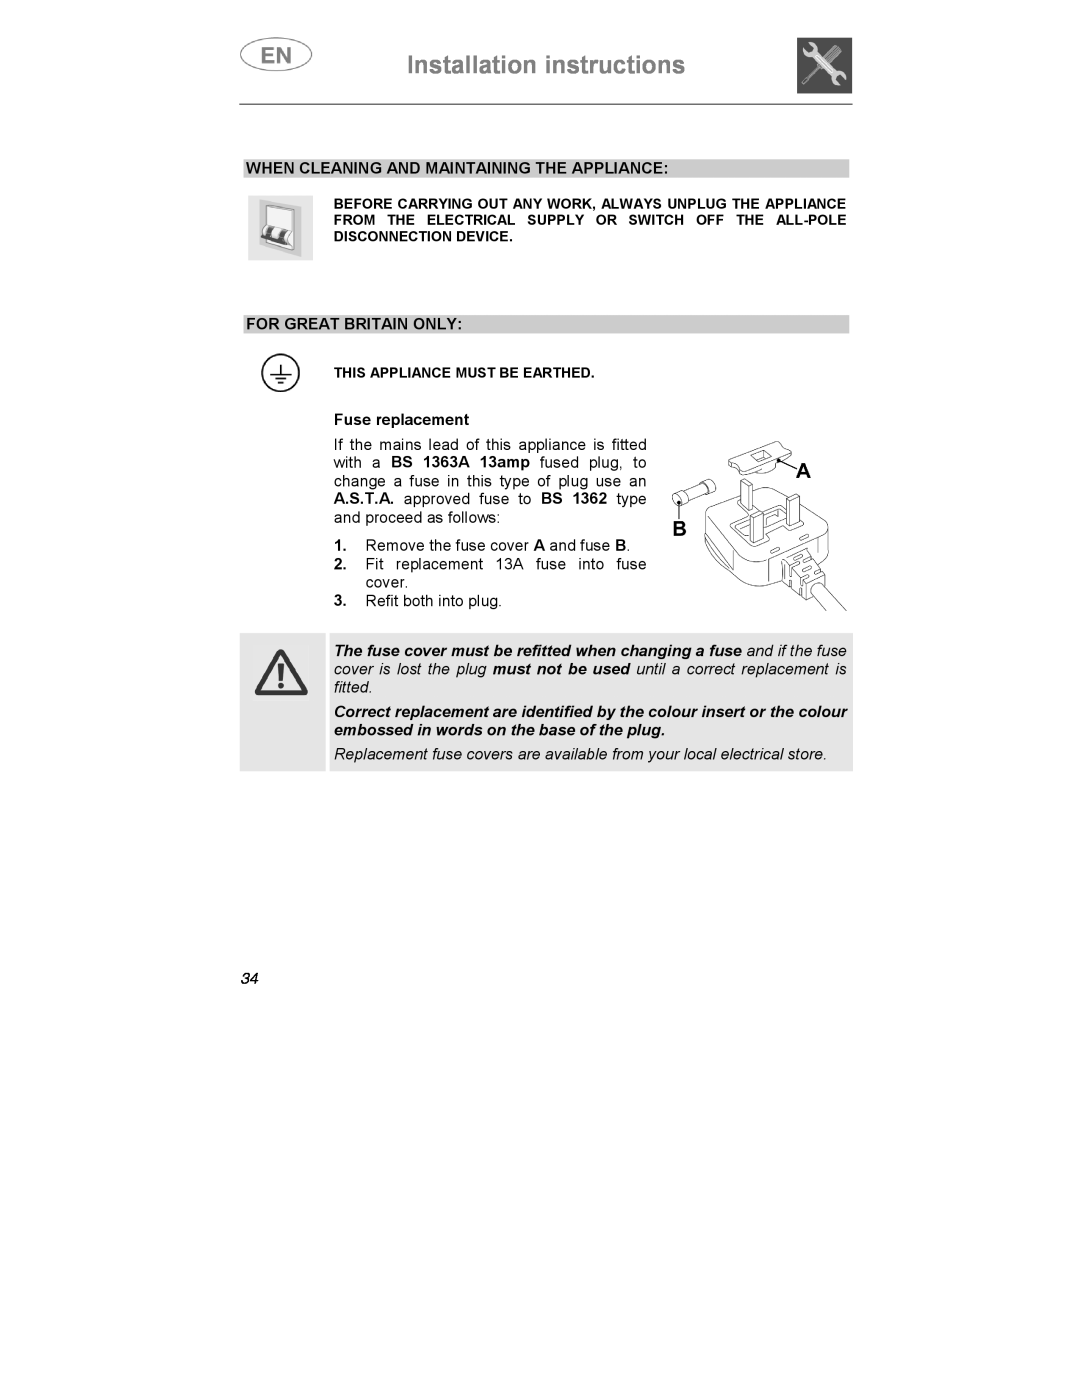 Smeg KLS01-2, KLS1257B Installation instructions, When Cleaning And Maintaining The Appliance, For Great Britain Only 